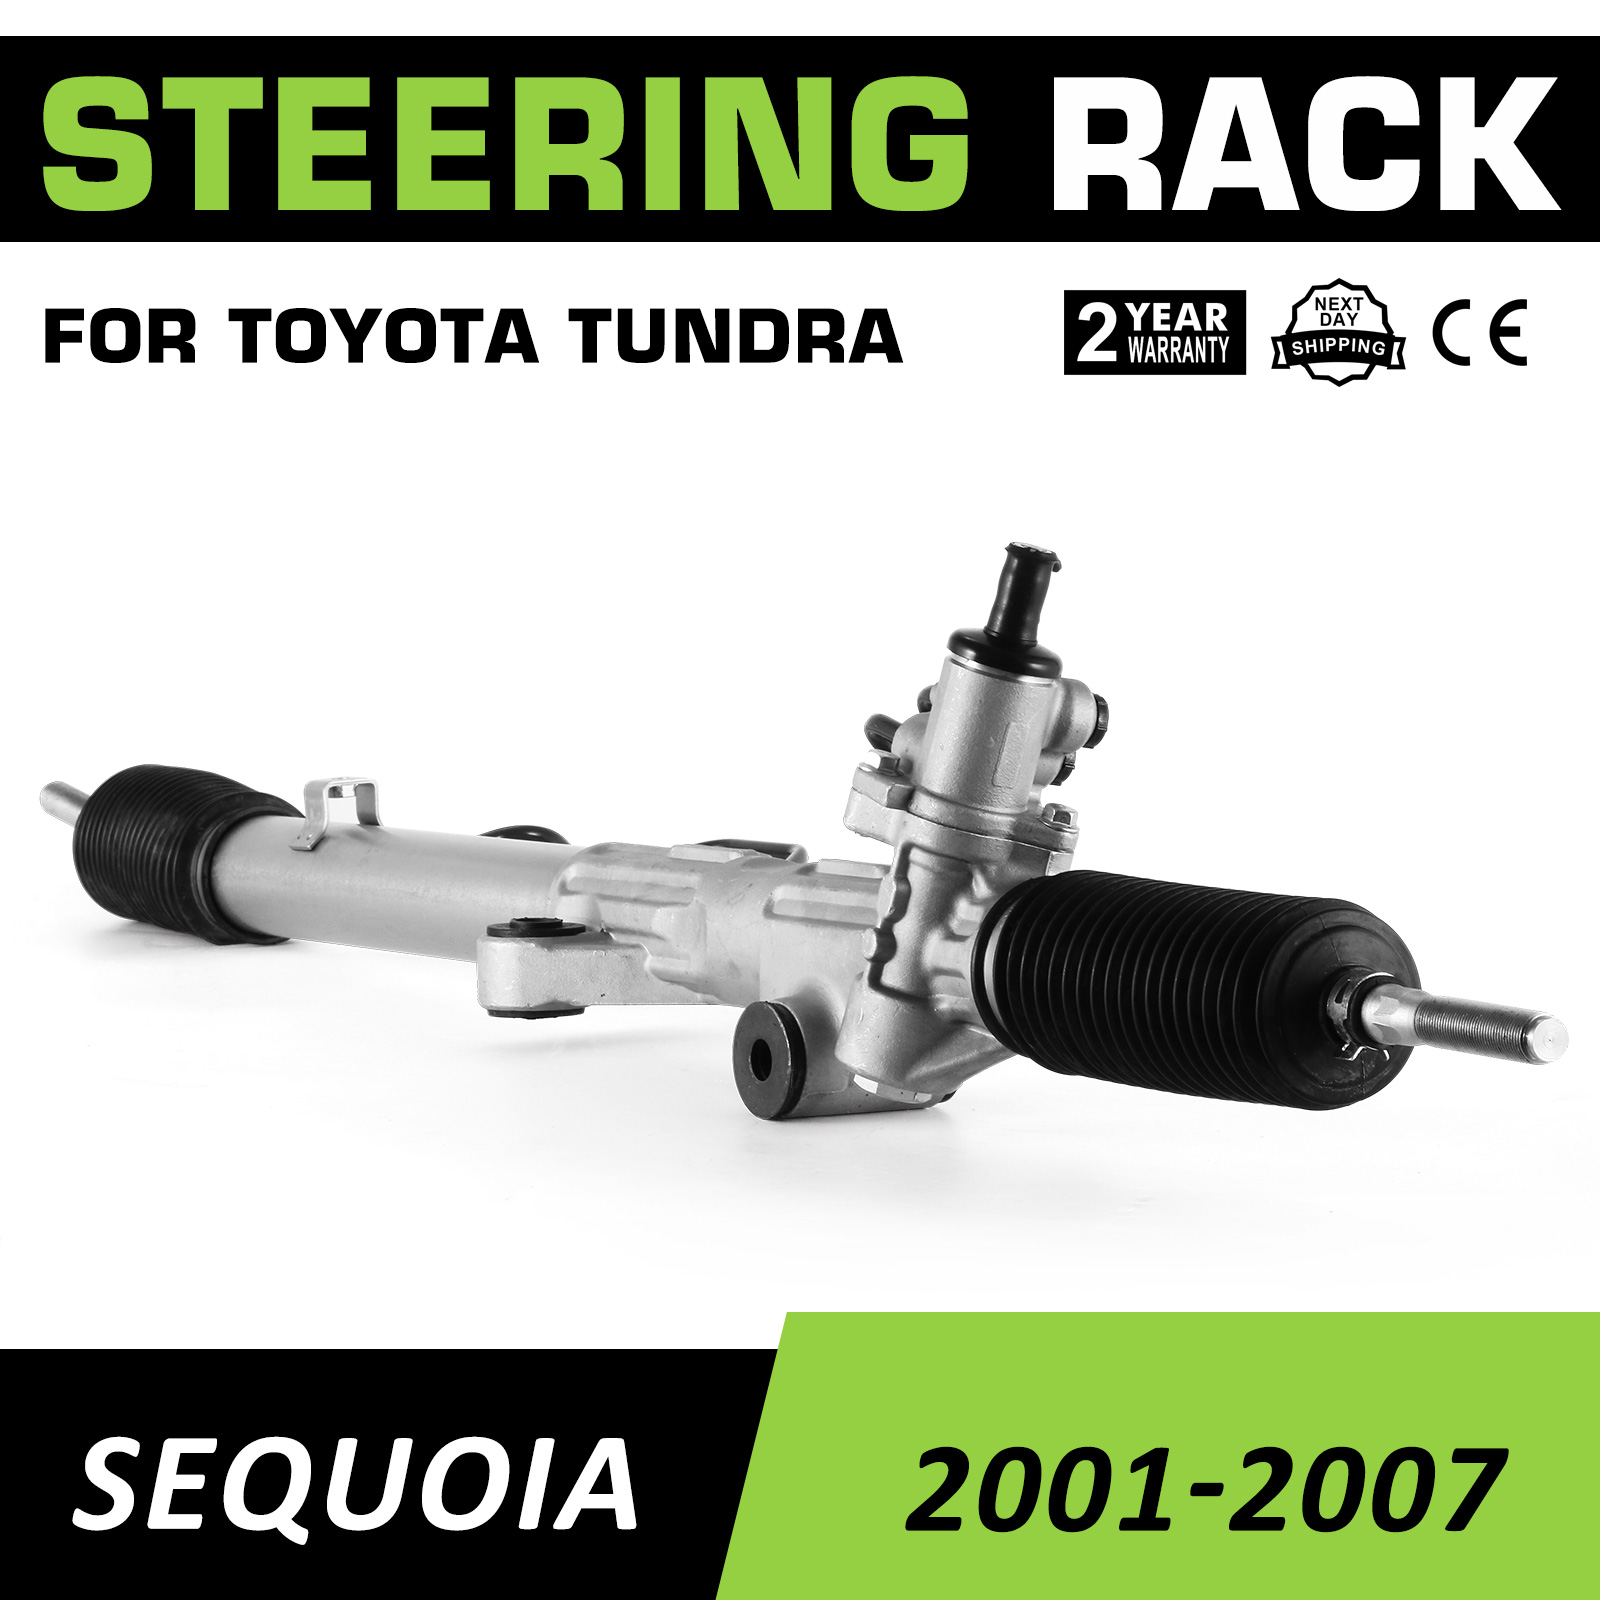 Pro Complete Power Steering Rack for Toyota Tundra Sequoia 2001-2007